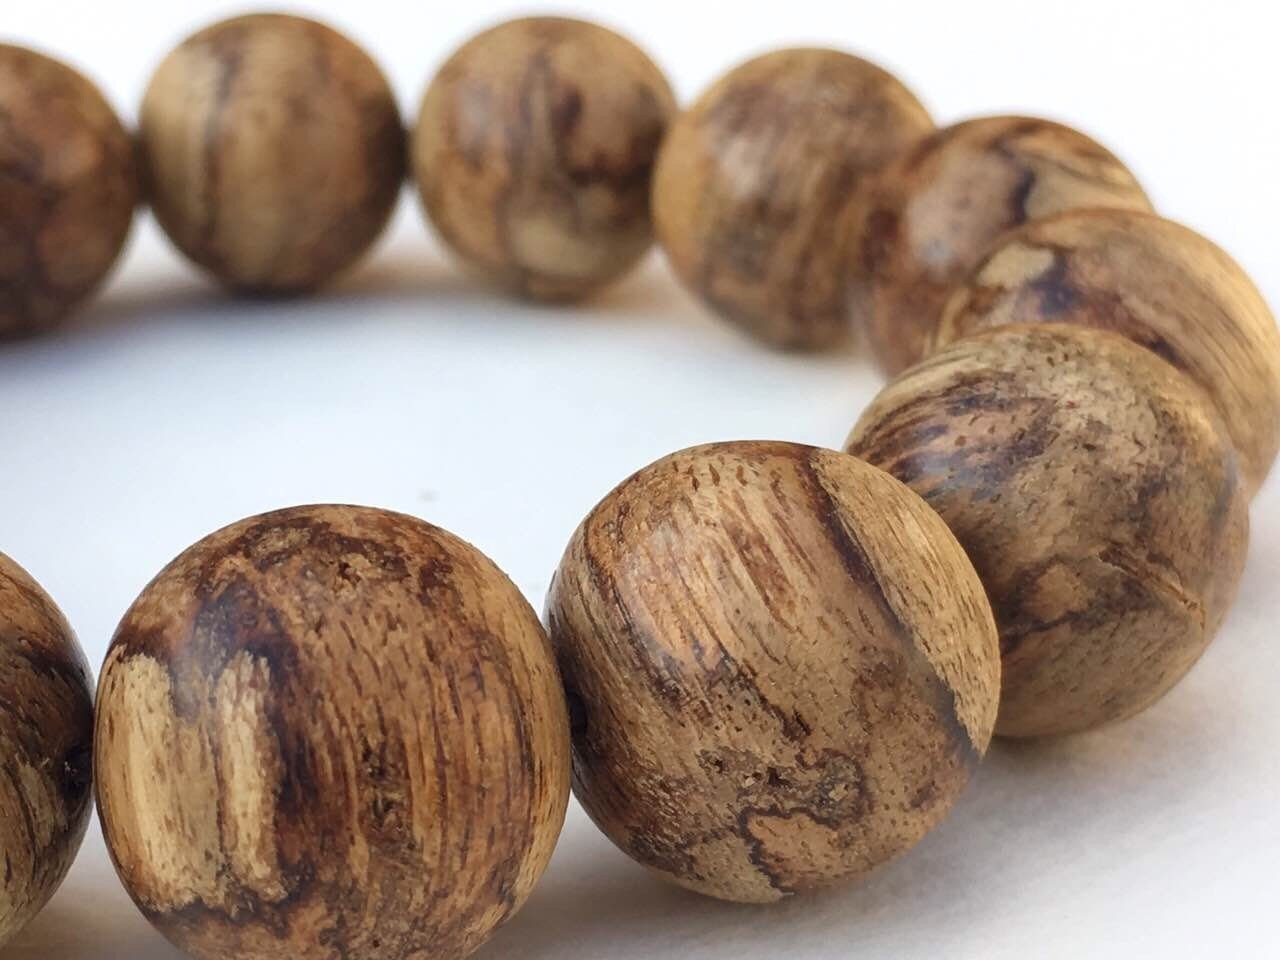 ZZ-SOLD OUT-ZZ- The Fearless Tiger Wild Agarwood Bracelet -